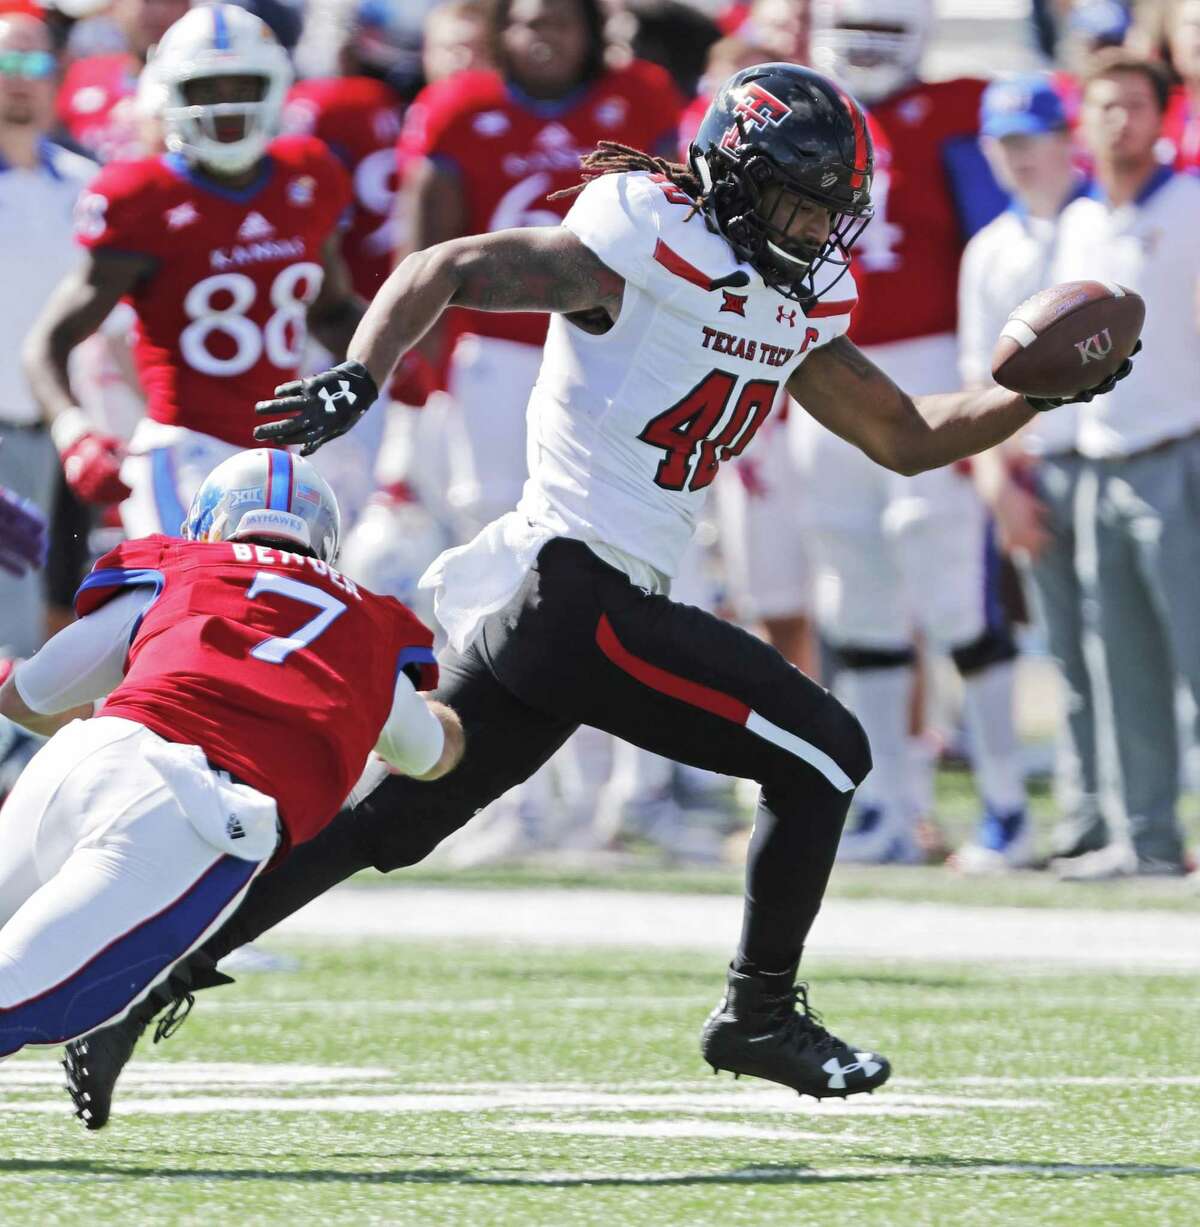 In this Oct. 7, 2017 photo 0Texas Tech's Dakota Allen (40) carries the ball after making a first half interception during the game against Kansas in Lawrence, Kan. Allen still feels this is his last chance, even after a successful return to Texas Tech following a well-documented season at an East Mississippi junior college. After being Tech's second-leading tackler as a freshman in 2015, the linebacker was involved in an off-field incident which led to him being kicked off the team and out of school. He thought his football career was over. But he spent the 2016 season with the first team featured in Netflix's "Last Chance U" series, then got the opportunity to return to Texas Tech. He was a team captain last season and now goes into his senior year as a preseason All-Big 12 pick. (Mark Rogers/Lubbock Avalanche-Journal via AP)